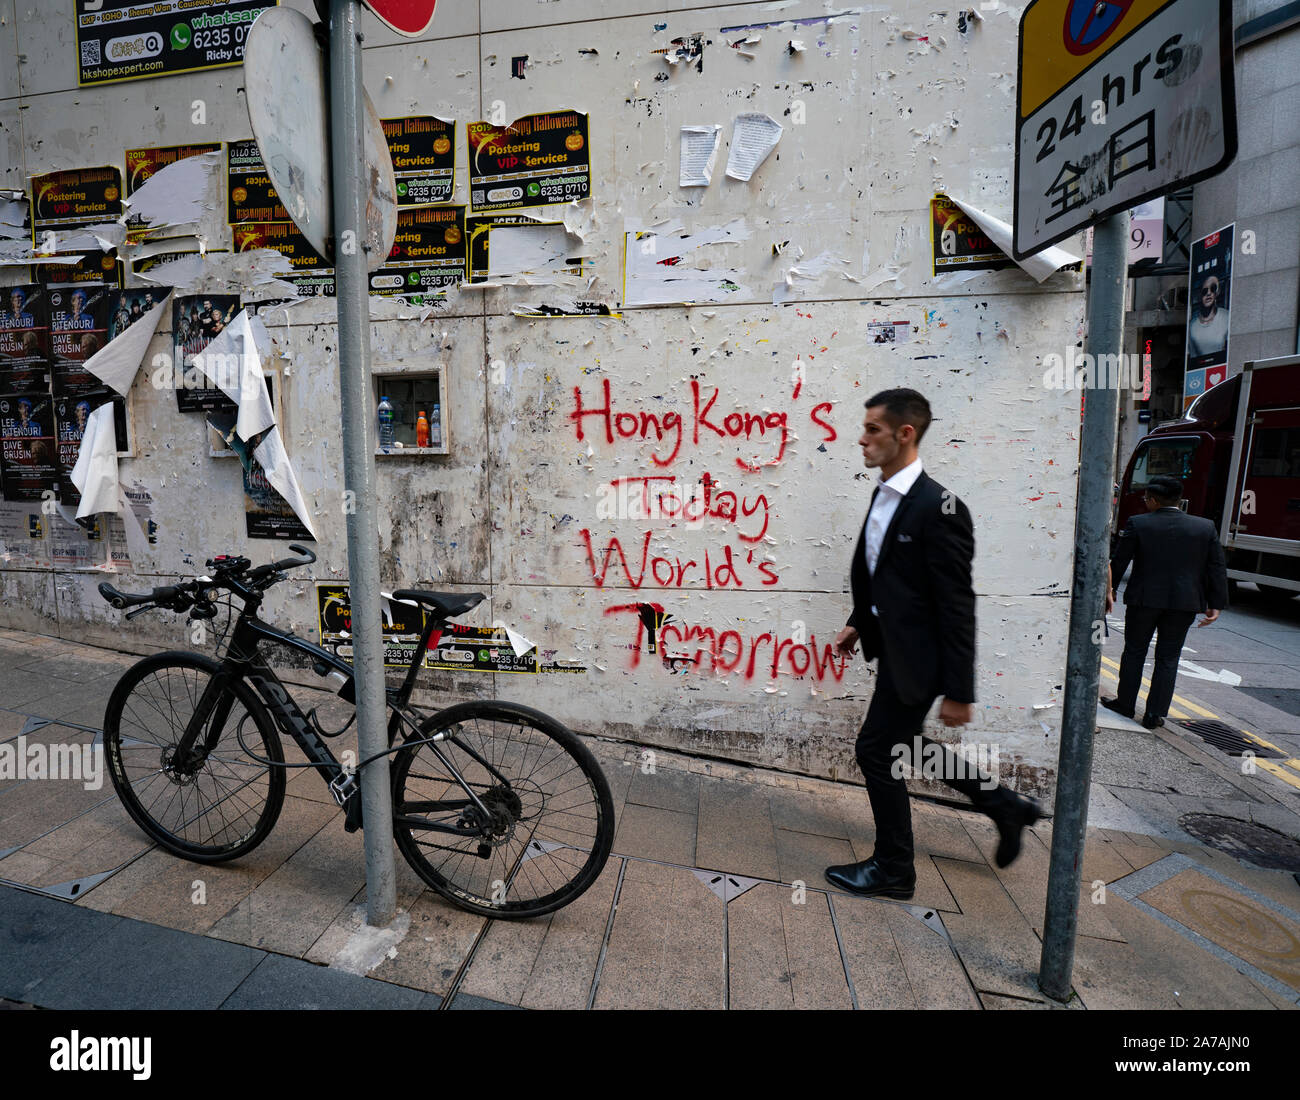 Pro-democracy graffiti sprayed on wall in Central district of Hong Kong Stock Photo